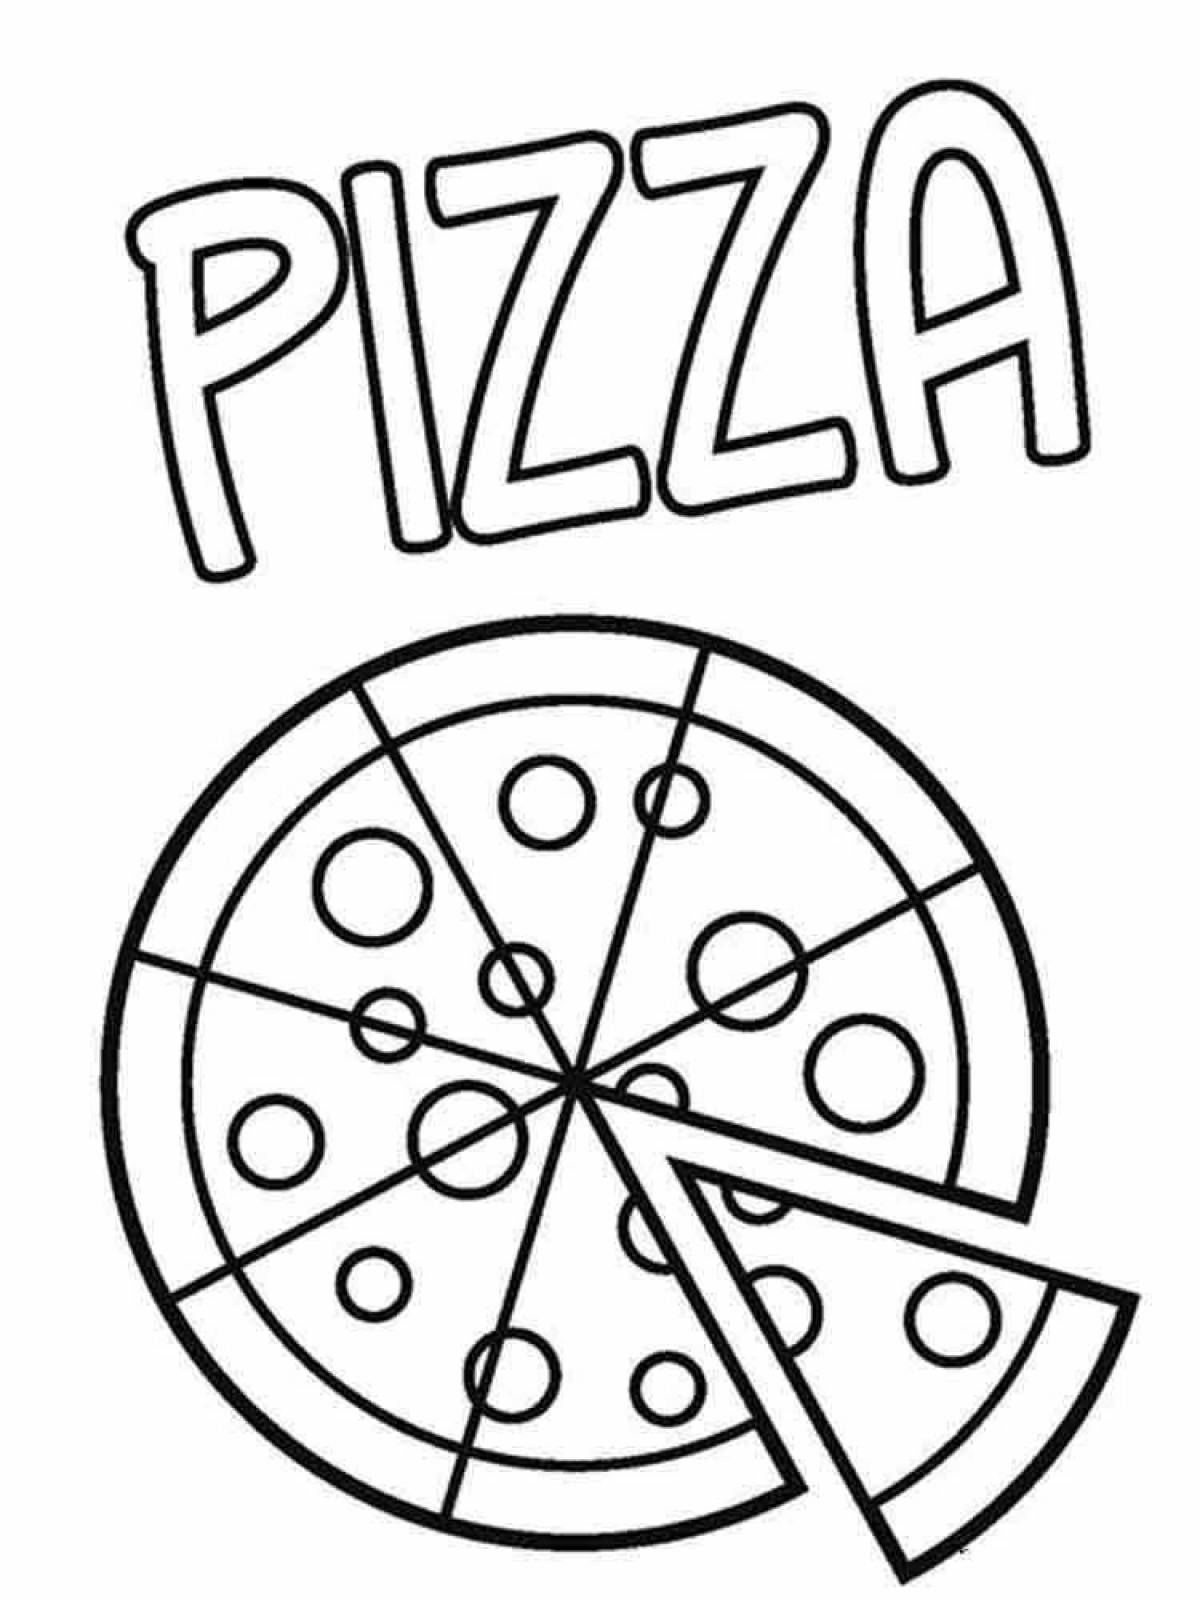 Coloring page fancy pizzeria